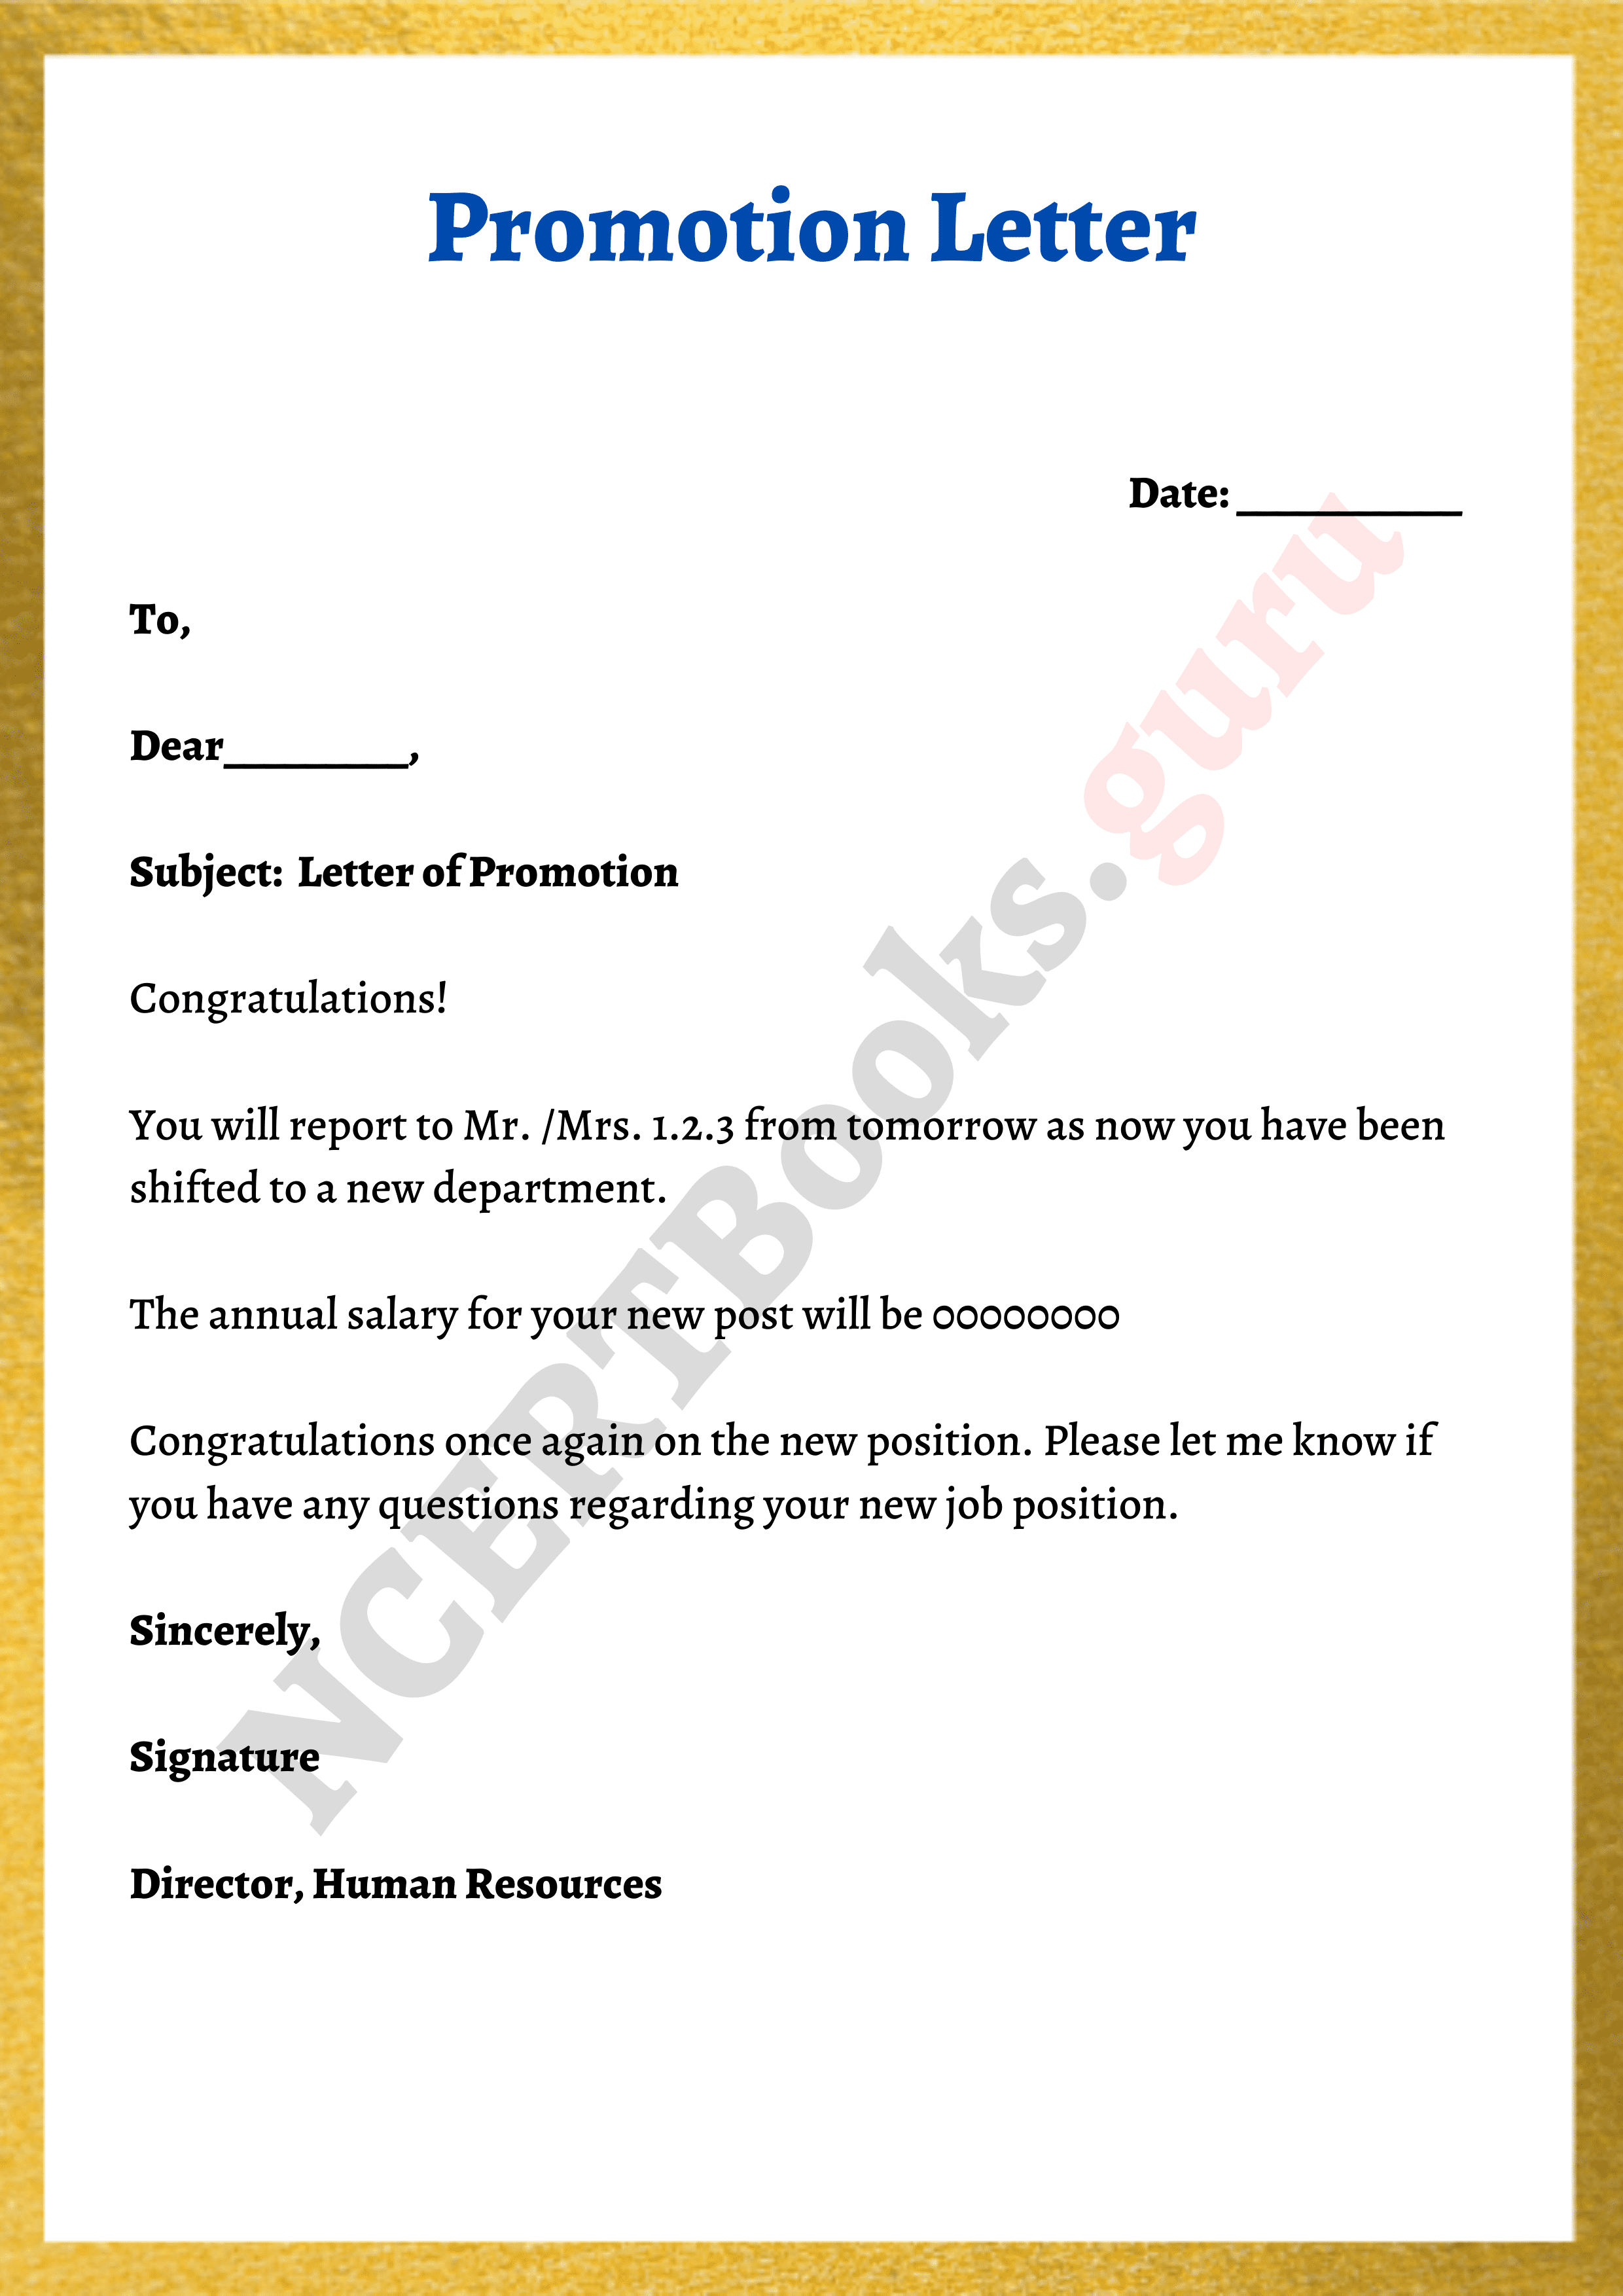 Promotion Letter Format, Samples  How to Write a Job Promotion